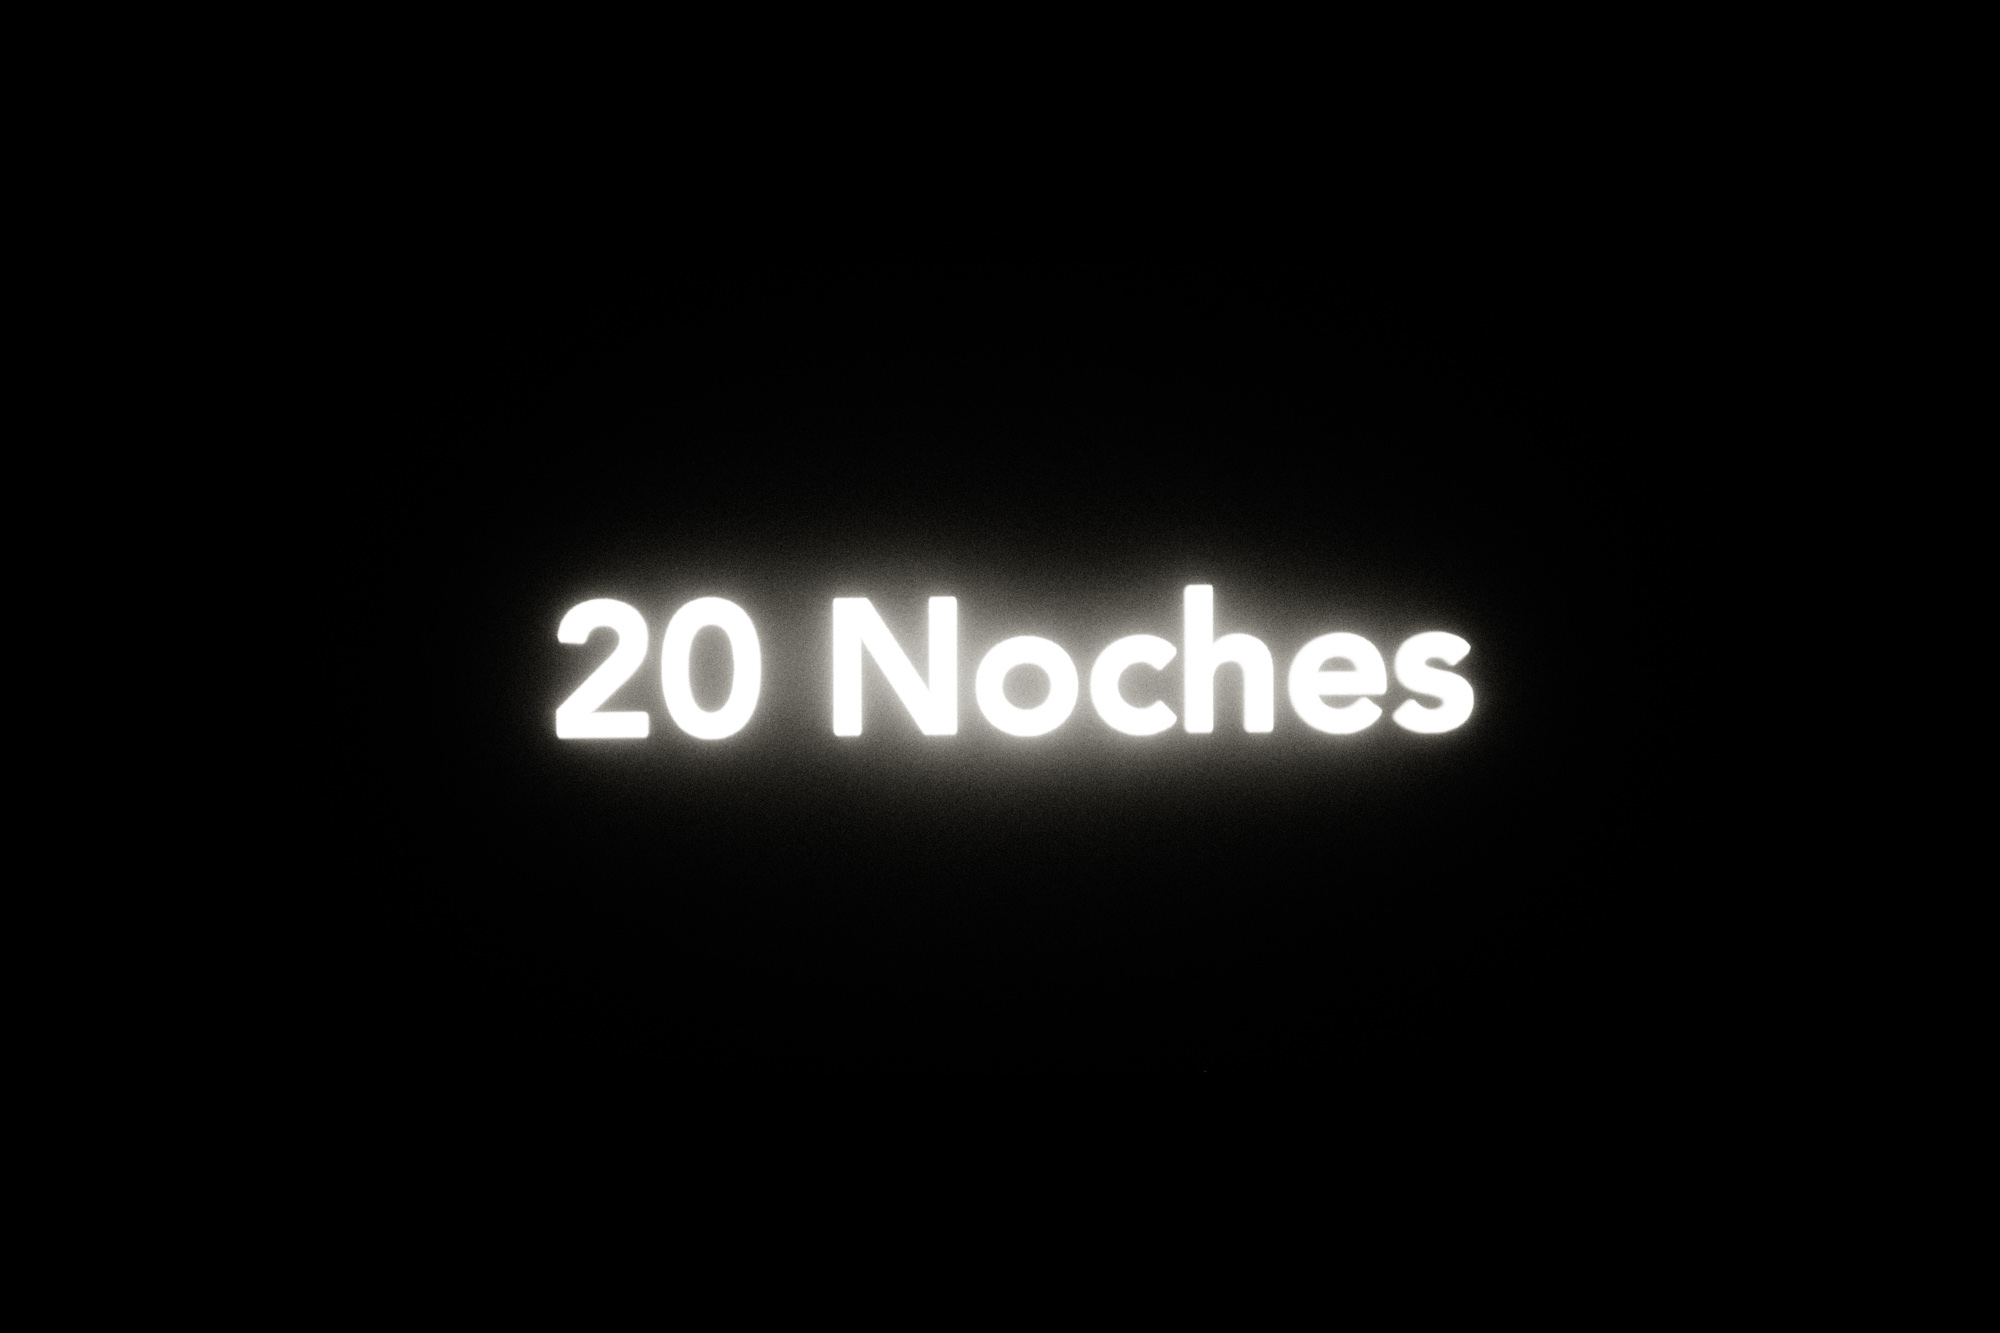  20 Noches (20 Nights) is a photo book and a poetry book at the same time. The project was born from the idea of using a portable projector during my night walks to cast words on the surface of the city. It is an encounter between street photography 